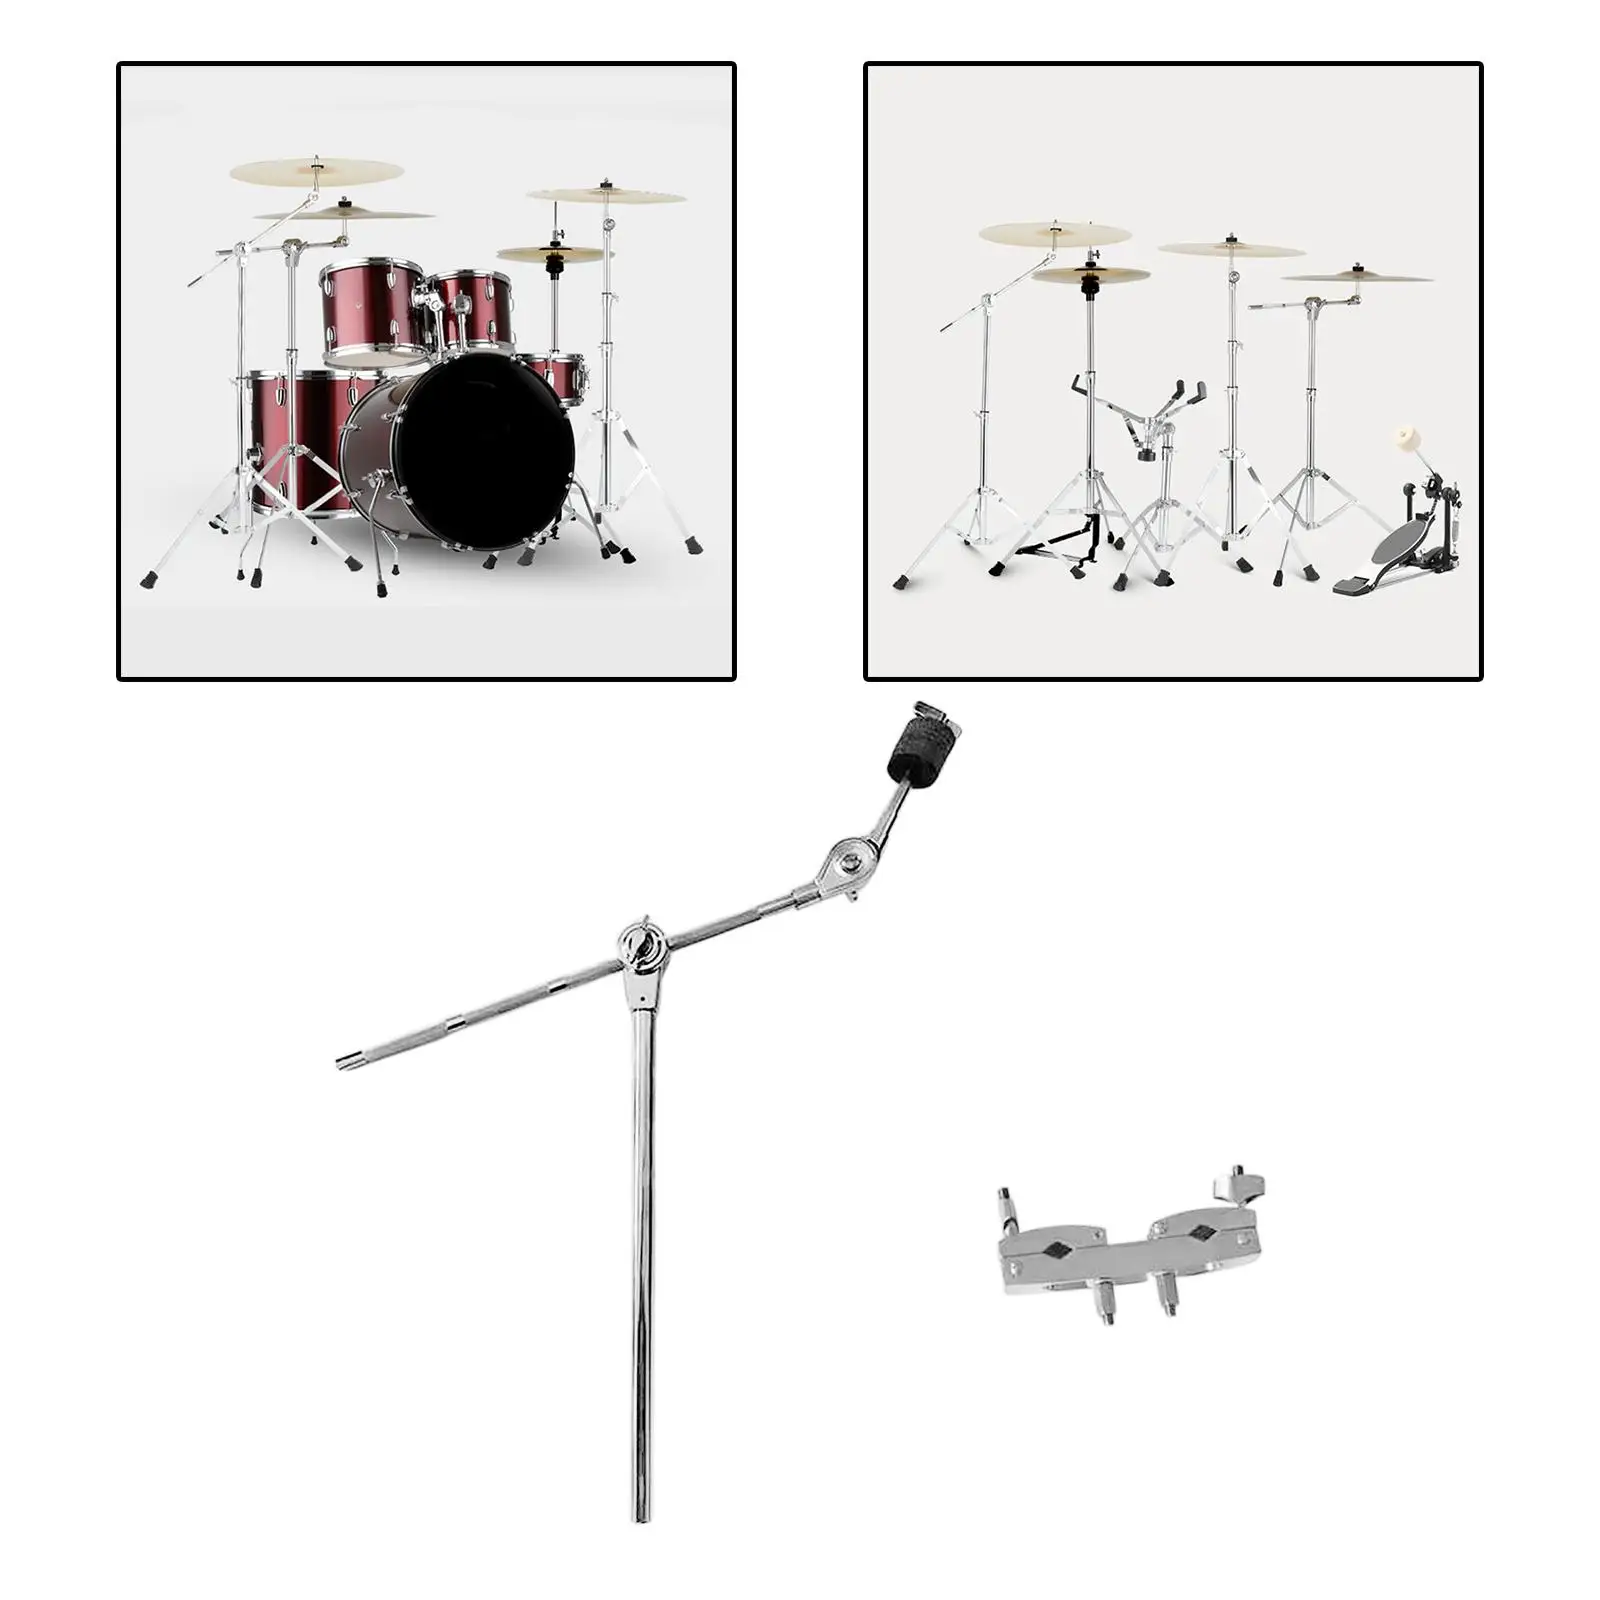 Cymbal Holder Removable Extension Attachment Cymbal Stands Cymbal Expand Arm Drum Cymbal Clamp Drum Kits Extension Stand Clamps